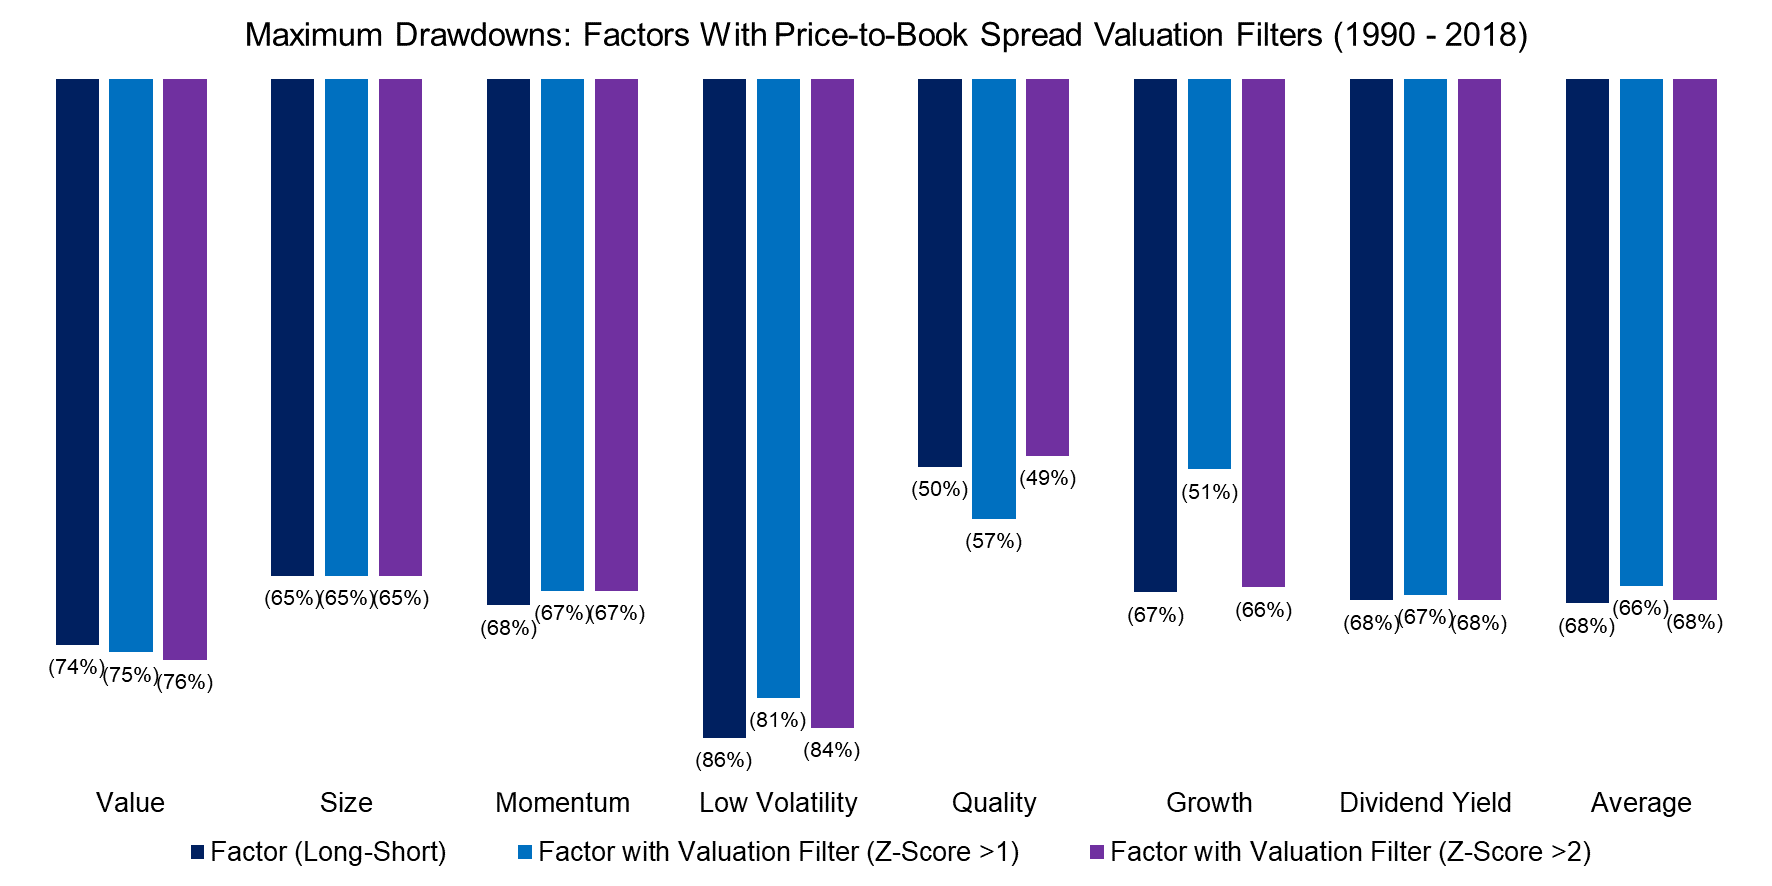 Maximum Drawdowns Factors With Price-to-Book Spread Valuation Filters (1990 - 2018)